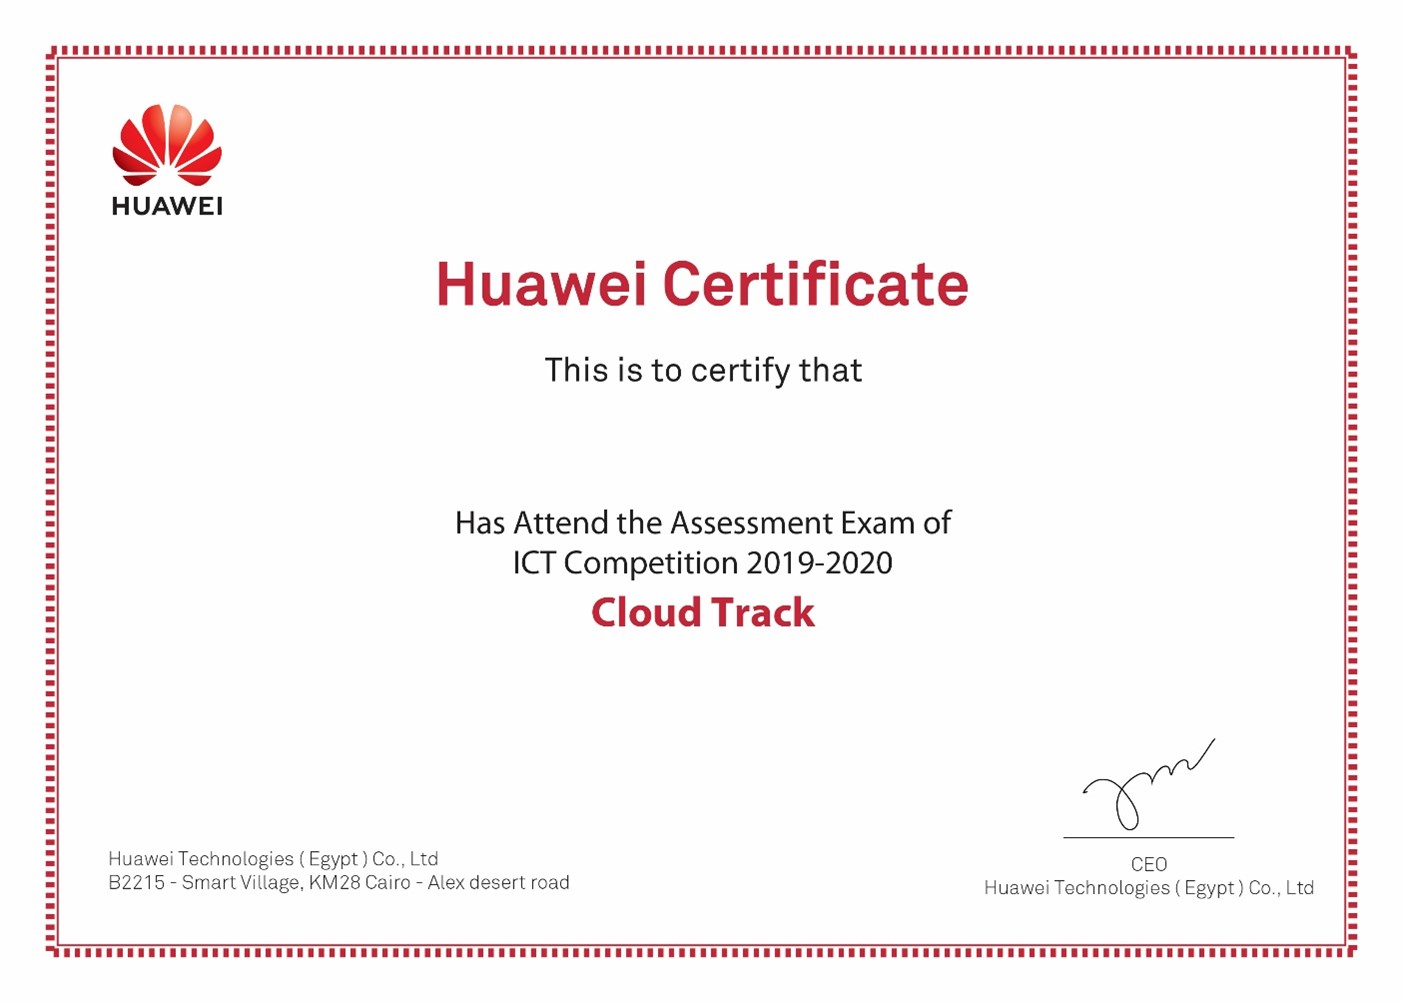 ICT competition -cloud track